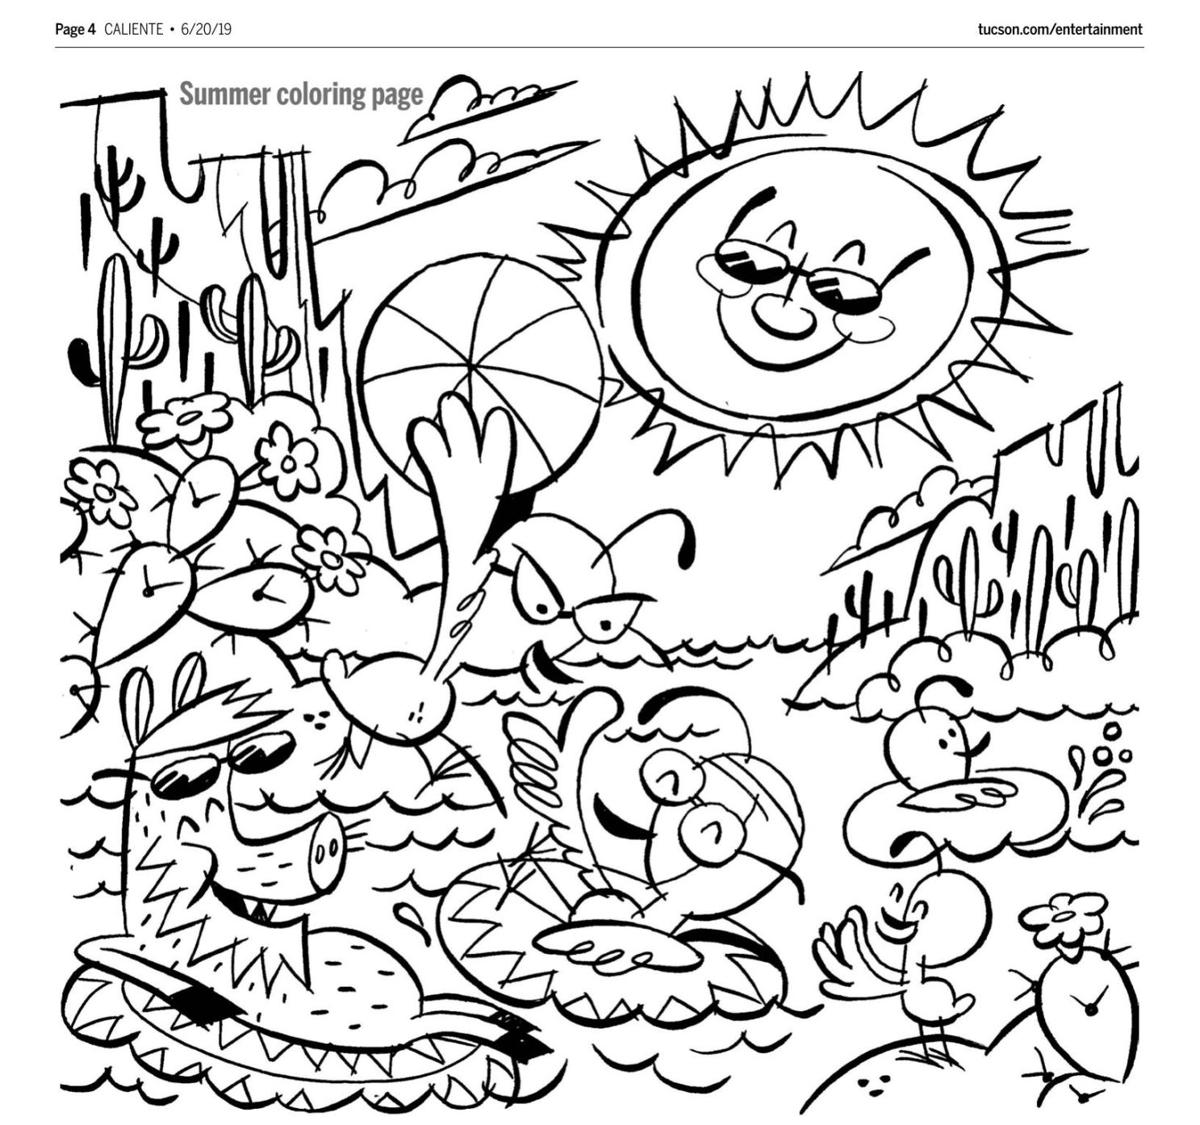 Print Out These 12 Totally Adorable Tucson Themed Coloring Pages Local News Tucson Com